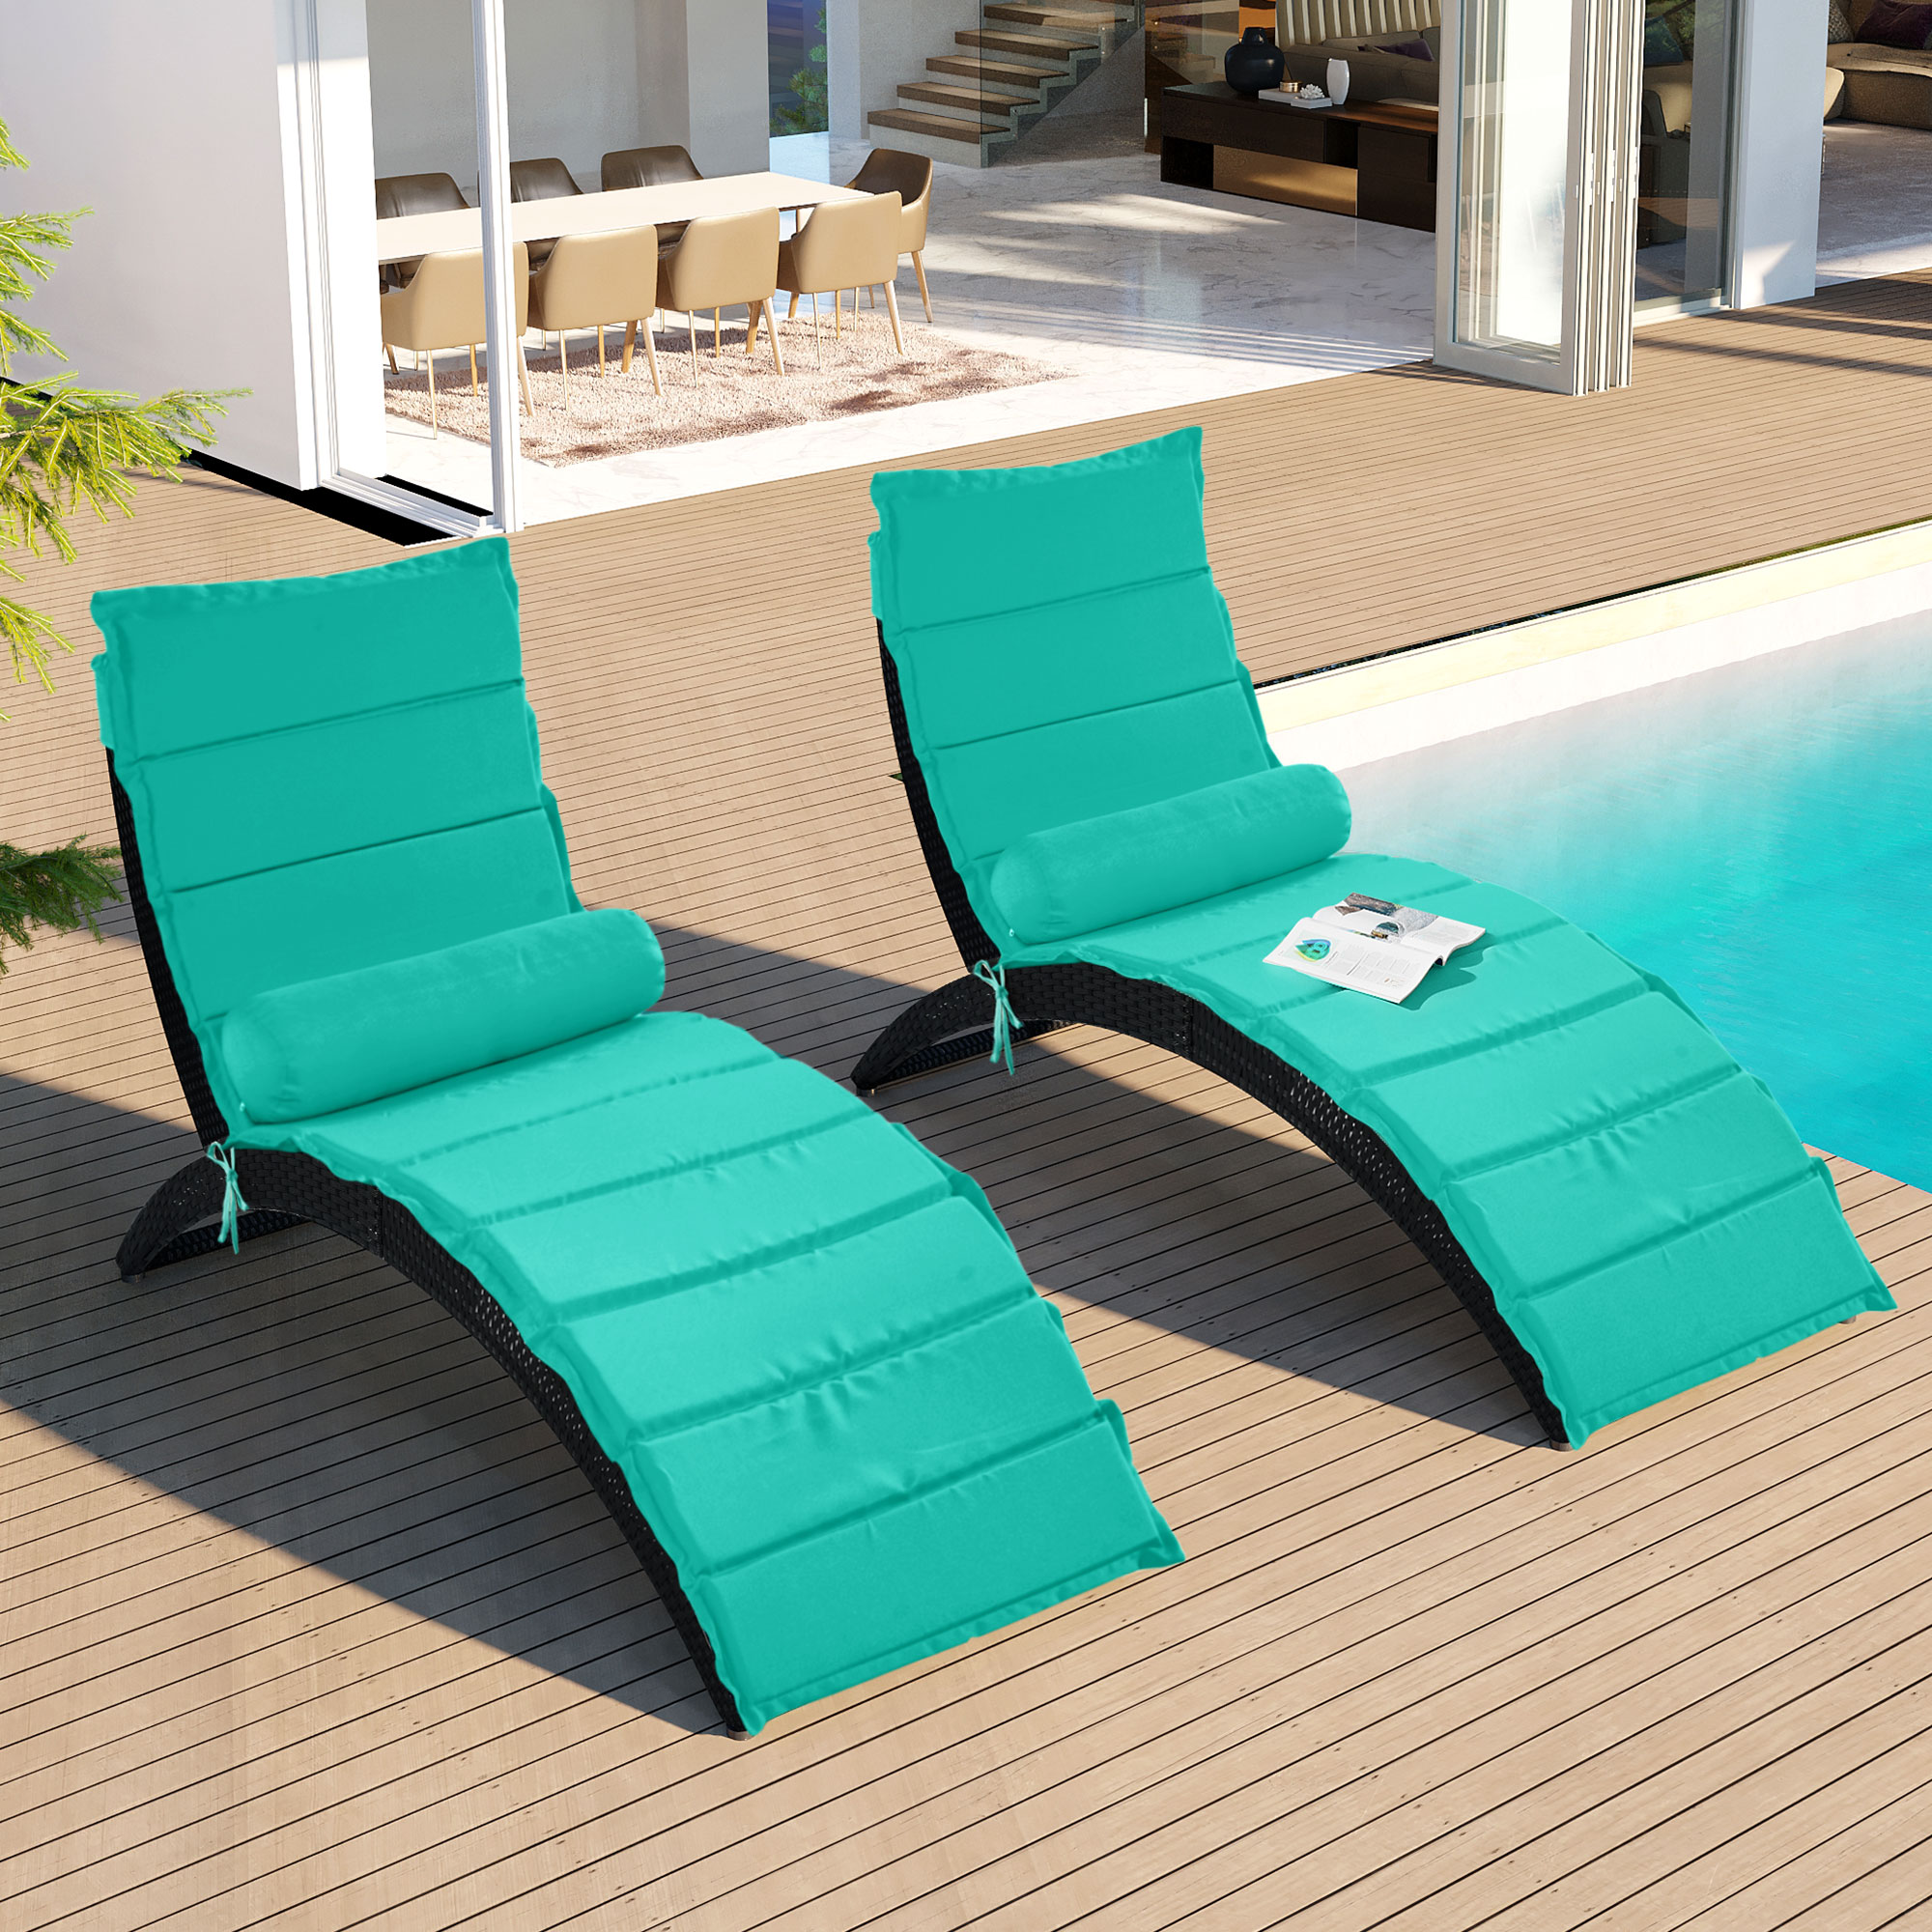 SYNGAR Chaise Lounge Chairs for Outside 2 Pieces, Patio Foldable Lounge Chairs Set of 2, Outdoor Rattan Wicker Pool Chaise Lounge Chairs Cushioned Poolside Chaise Lounge Set, Blue - image 3 of 10